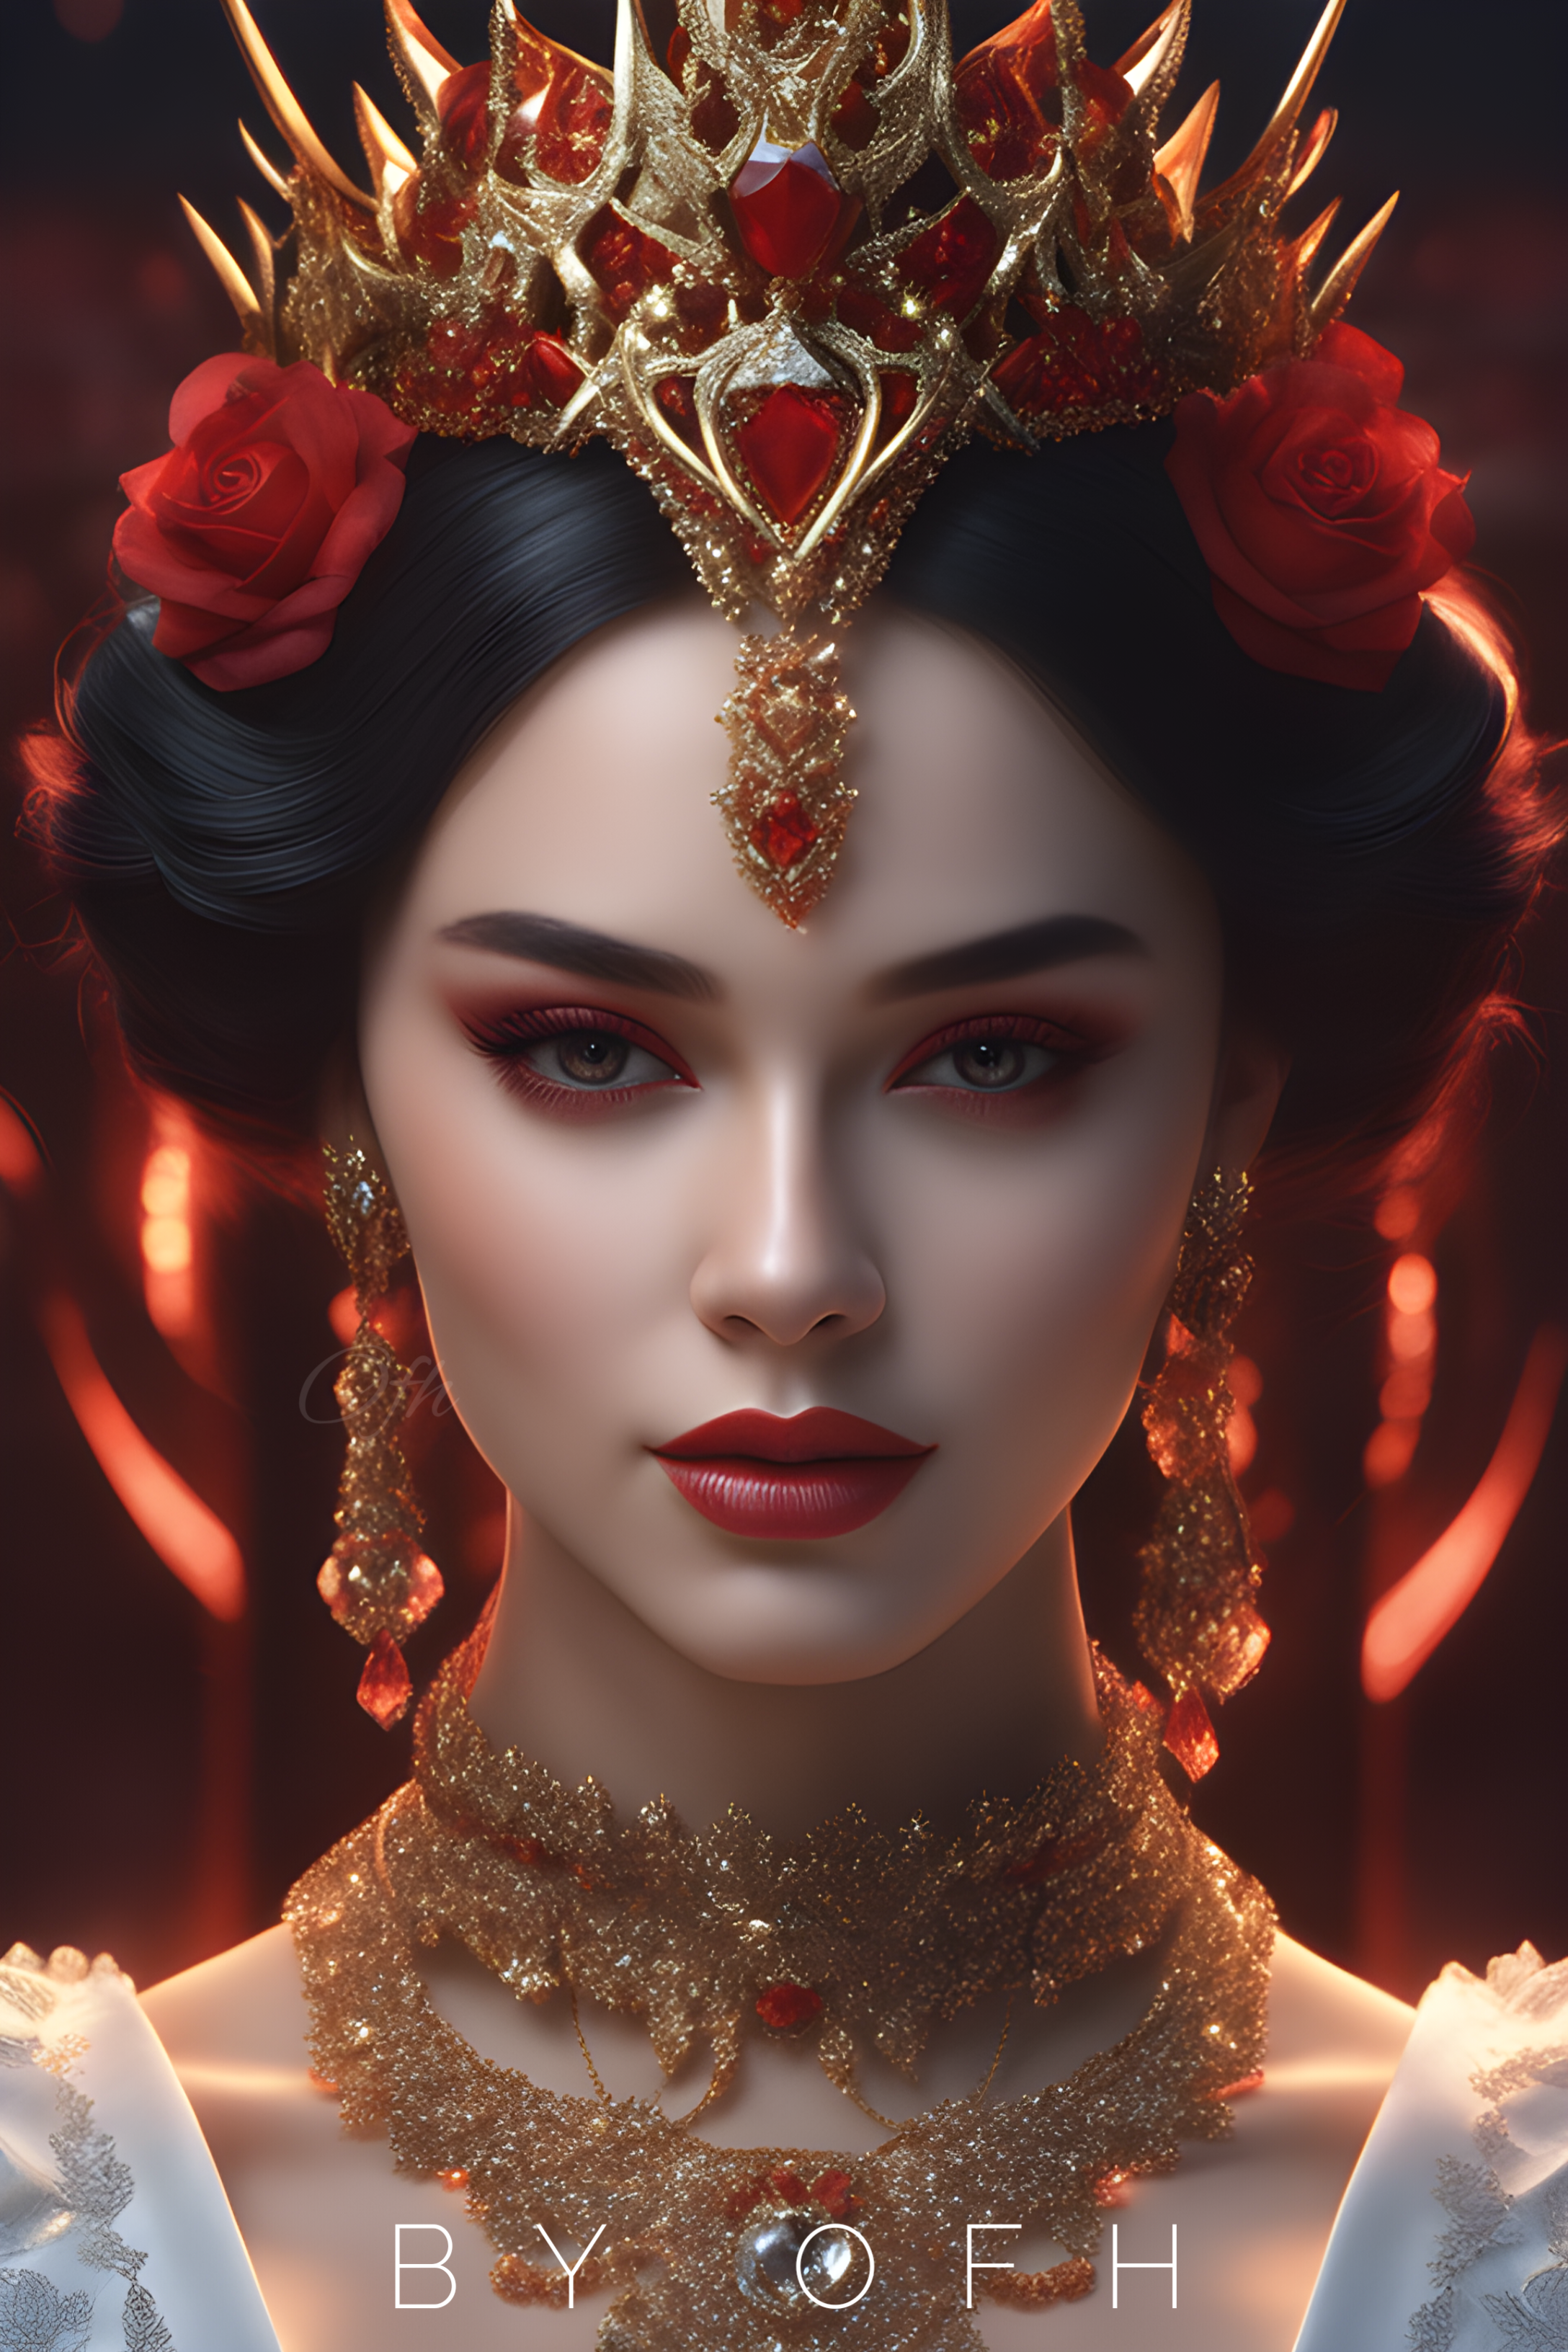 General 2176x3264 AI art OneFinalHug digital art fantasy girl bangles looking at viewer high detail imagination portrait display signature fictional character Asian women red lipstick parted lips makeup